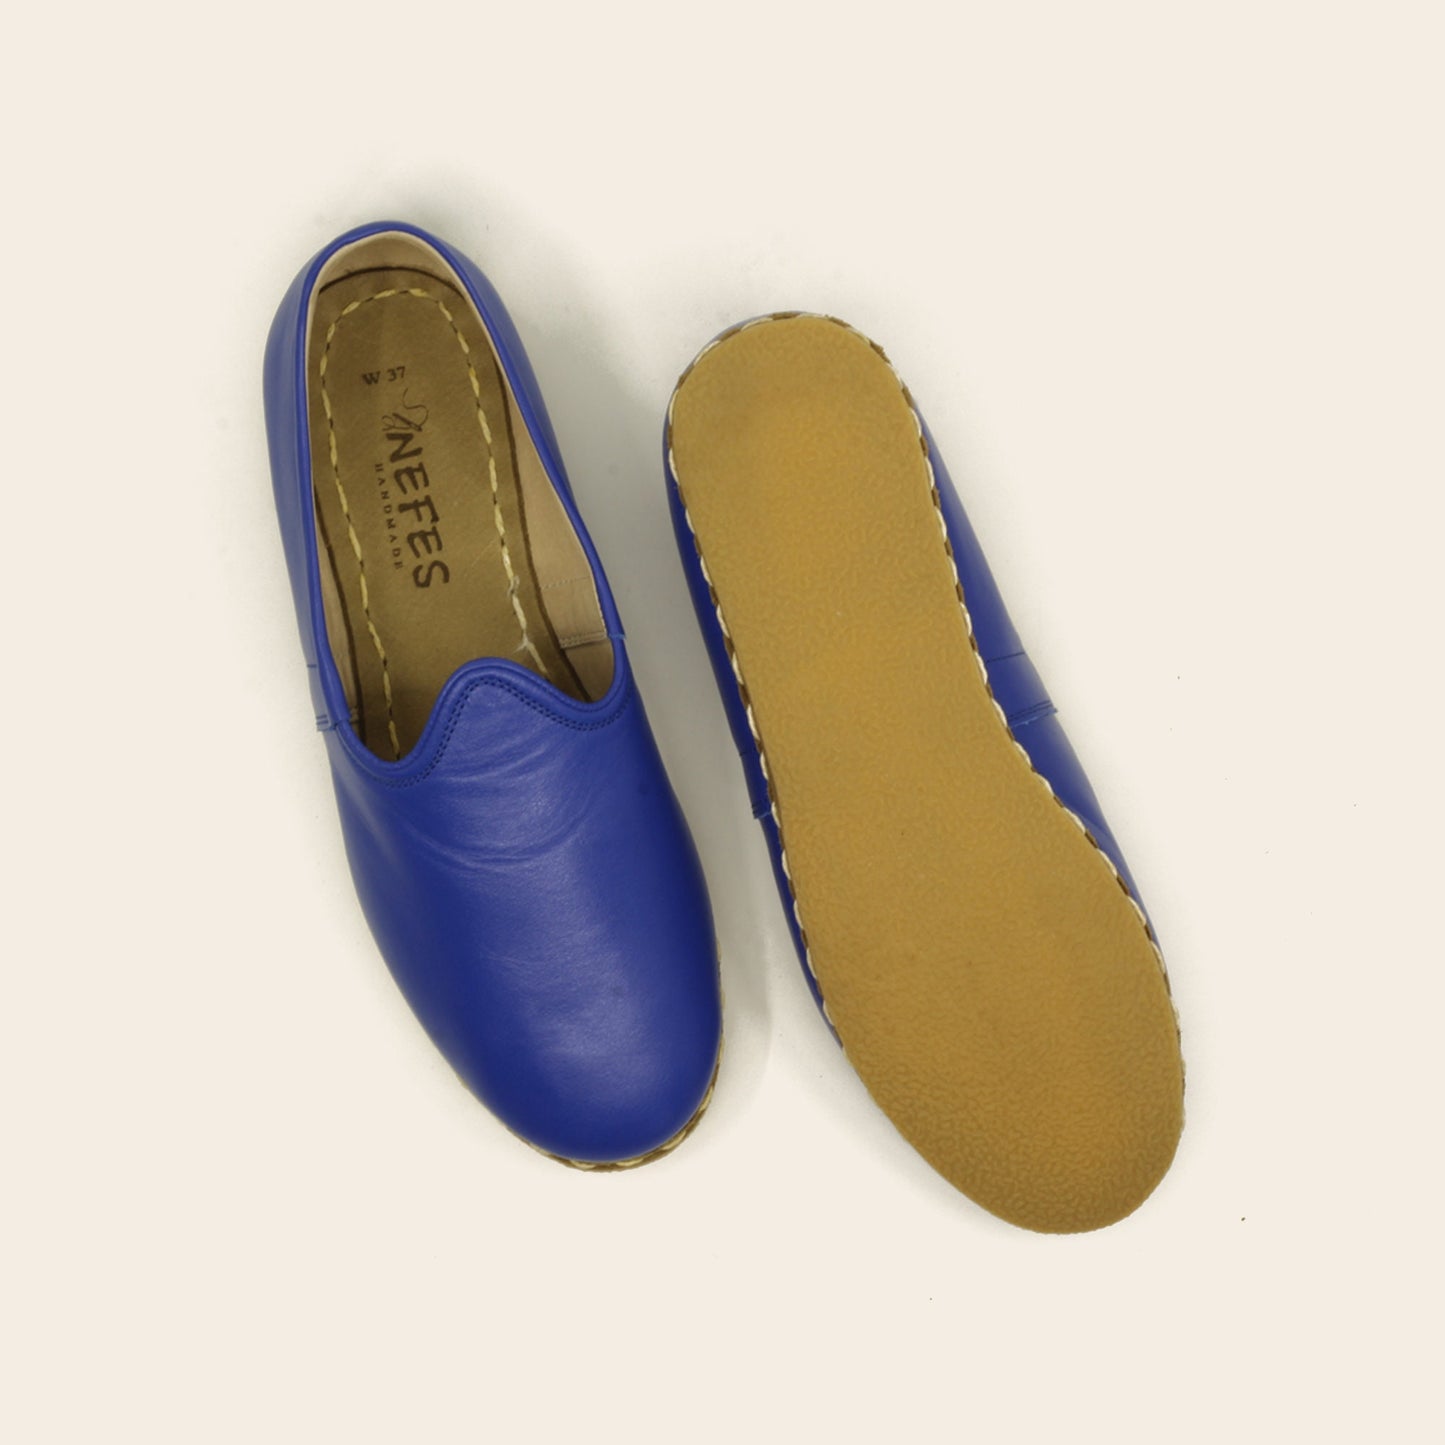 Blue Leather Handmade Loafer Shoes For Women - Nefes Shoes